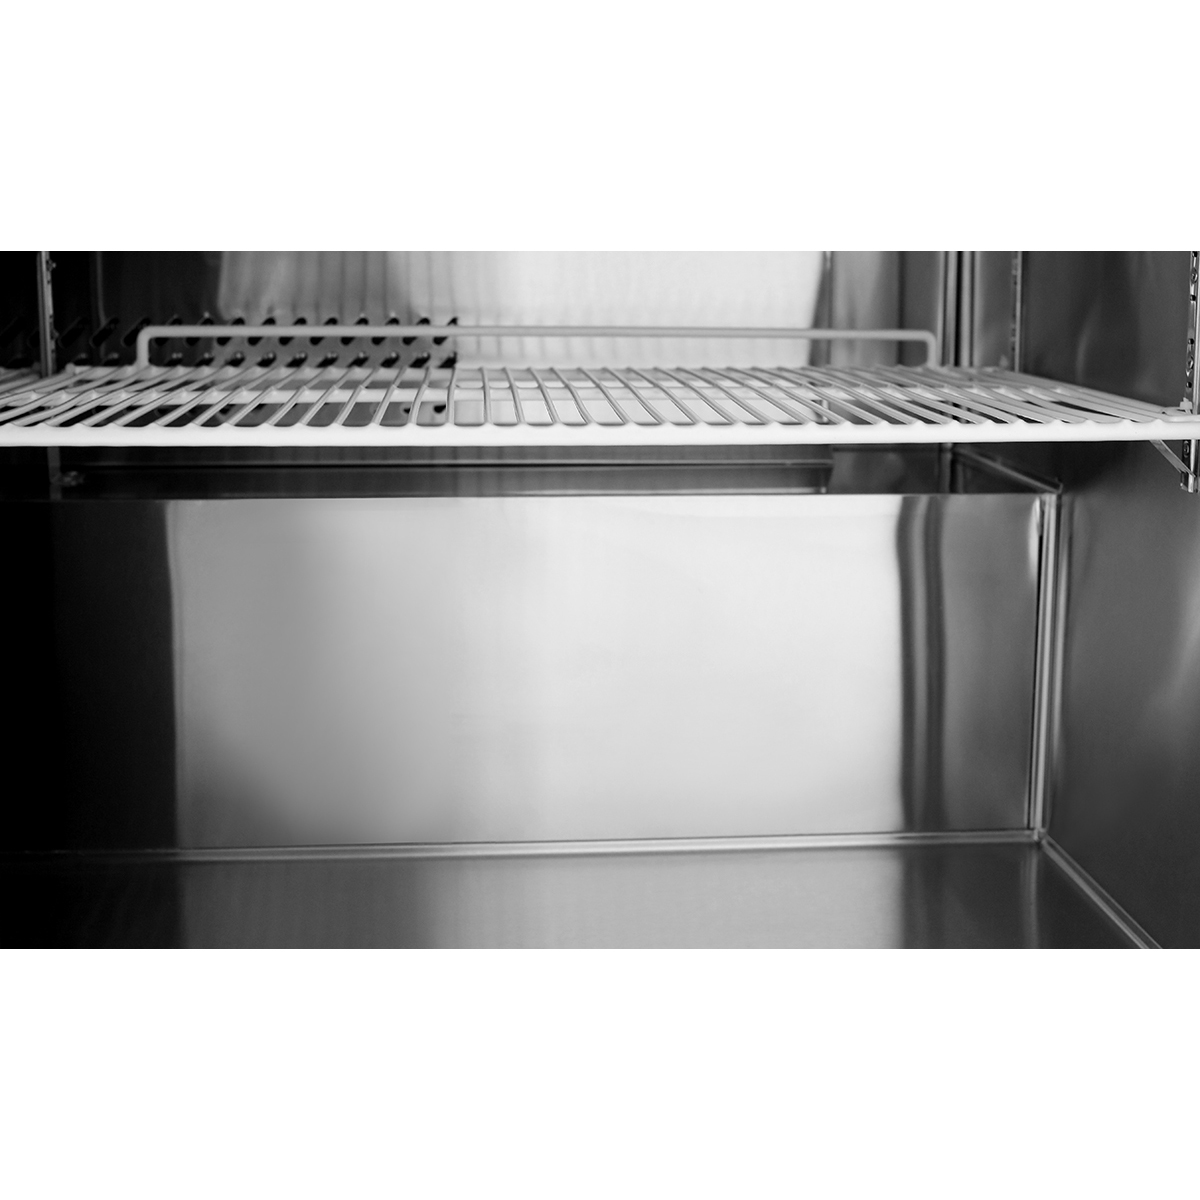 Atosa MGF8403GR Two Section Rear Mount Undercounter Refrigerator 60-1/4"W x 30"D x 34-1/8"H with 2 Solid Doors image 2